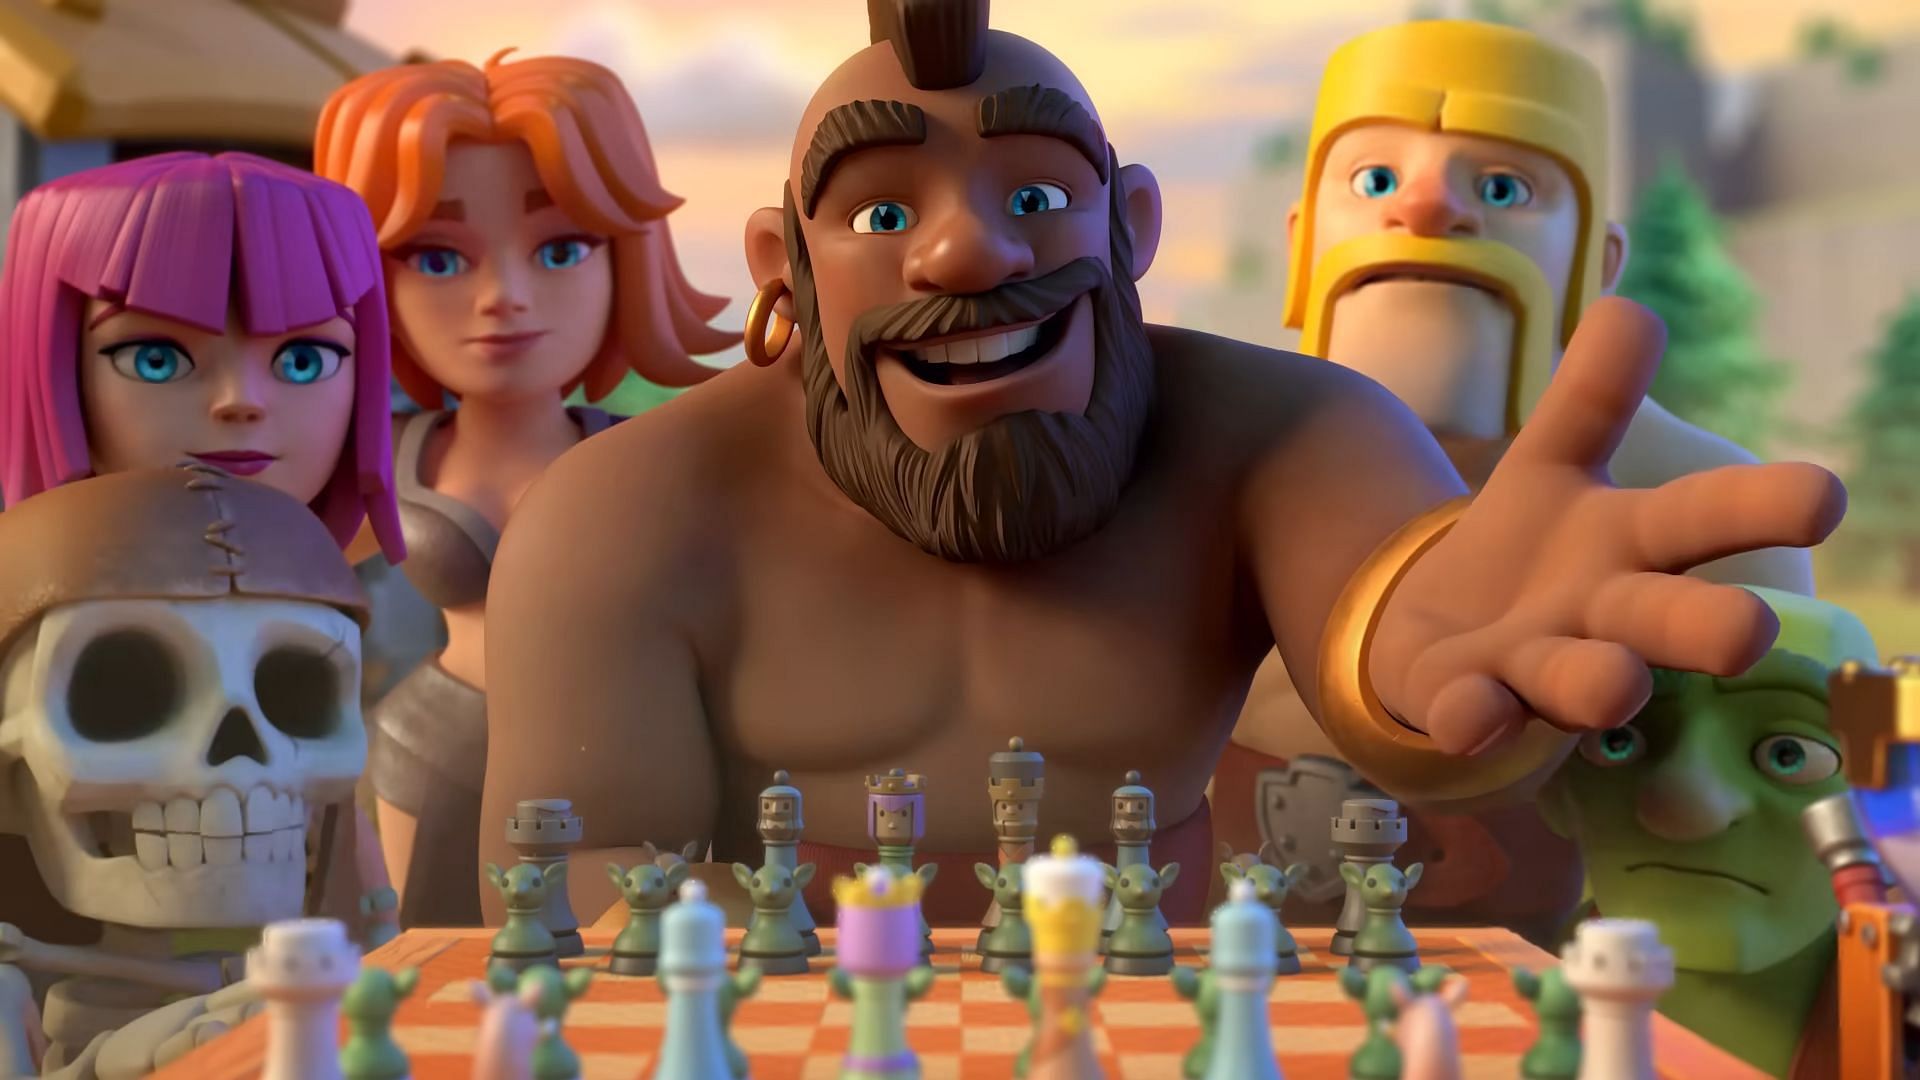 Solve the puzzles to get free 1.75 million Gold and Elixir in Clash of Clans (Image via Supercell)